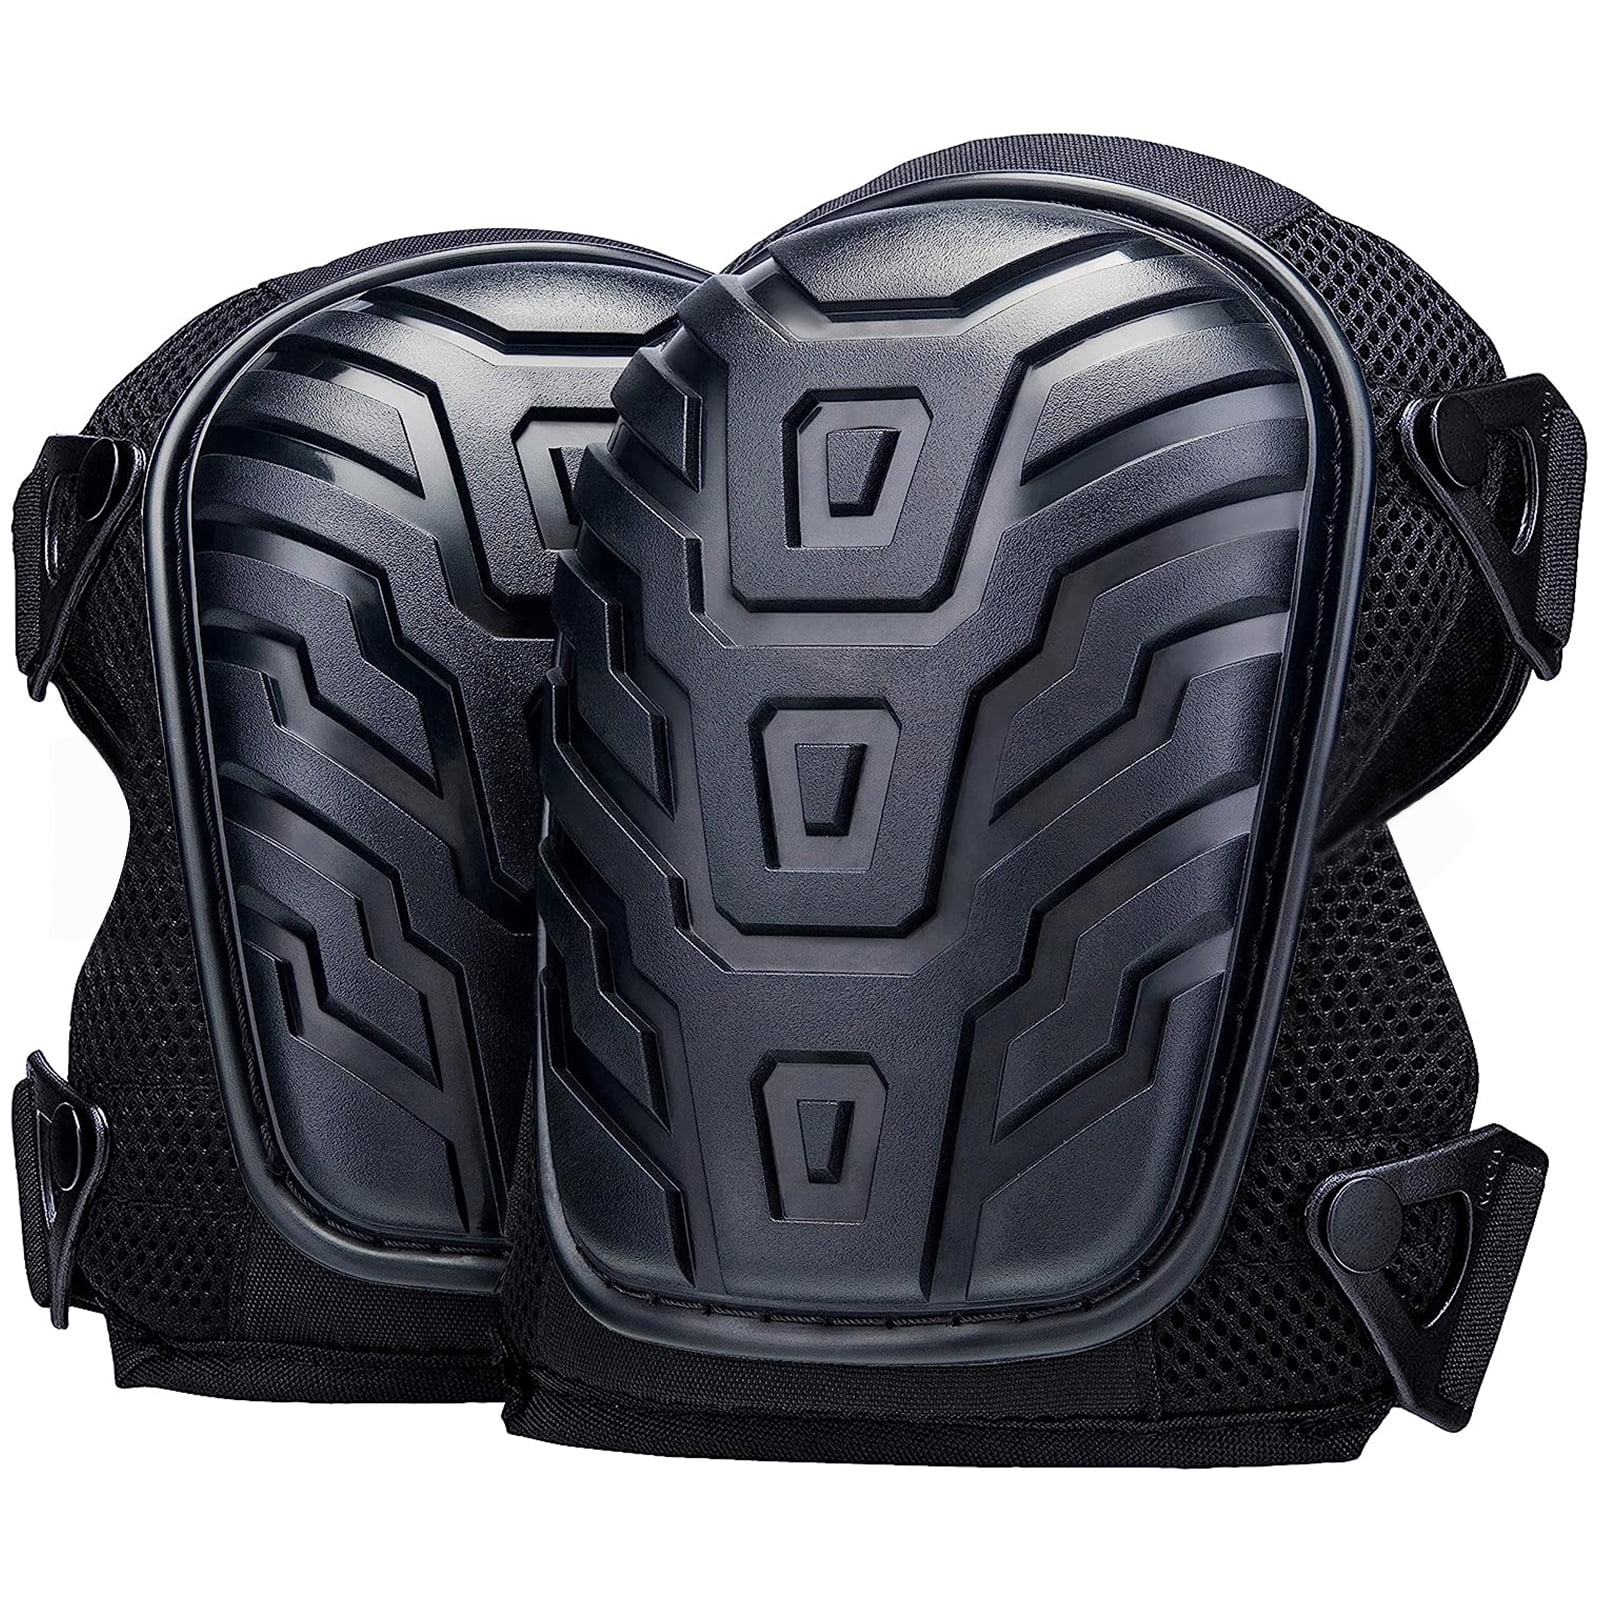 Professional Knee Pads for Work, Construction Knee Pads with Thick Gel ...